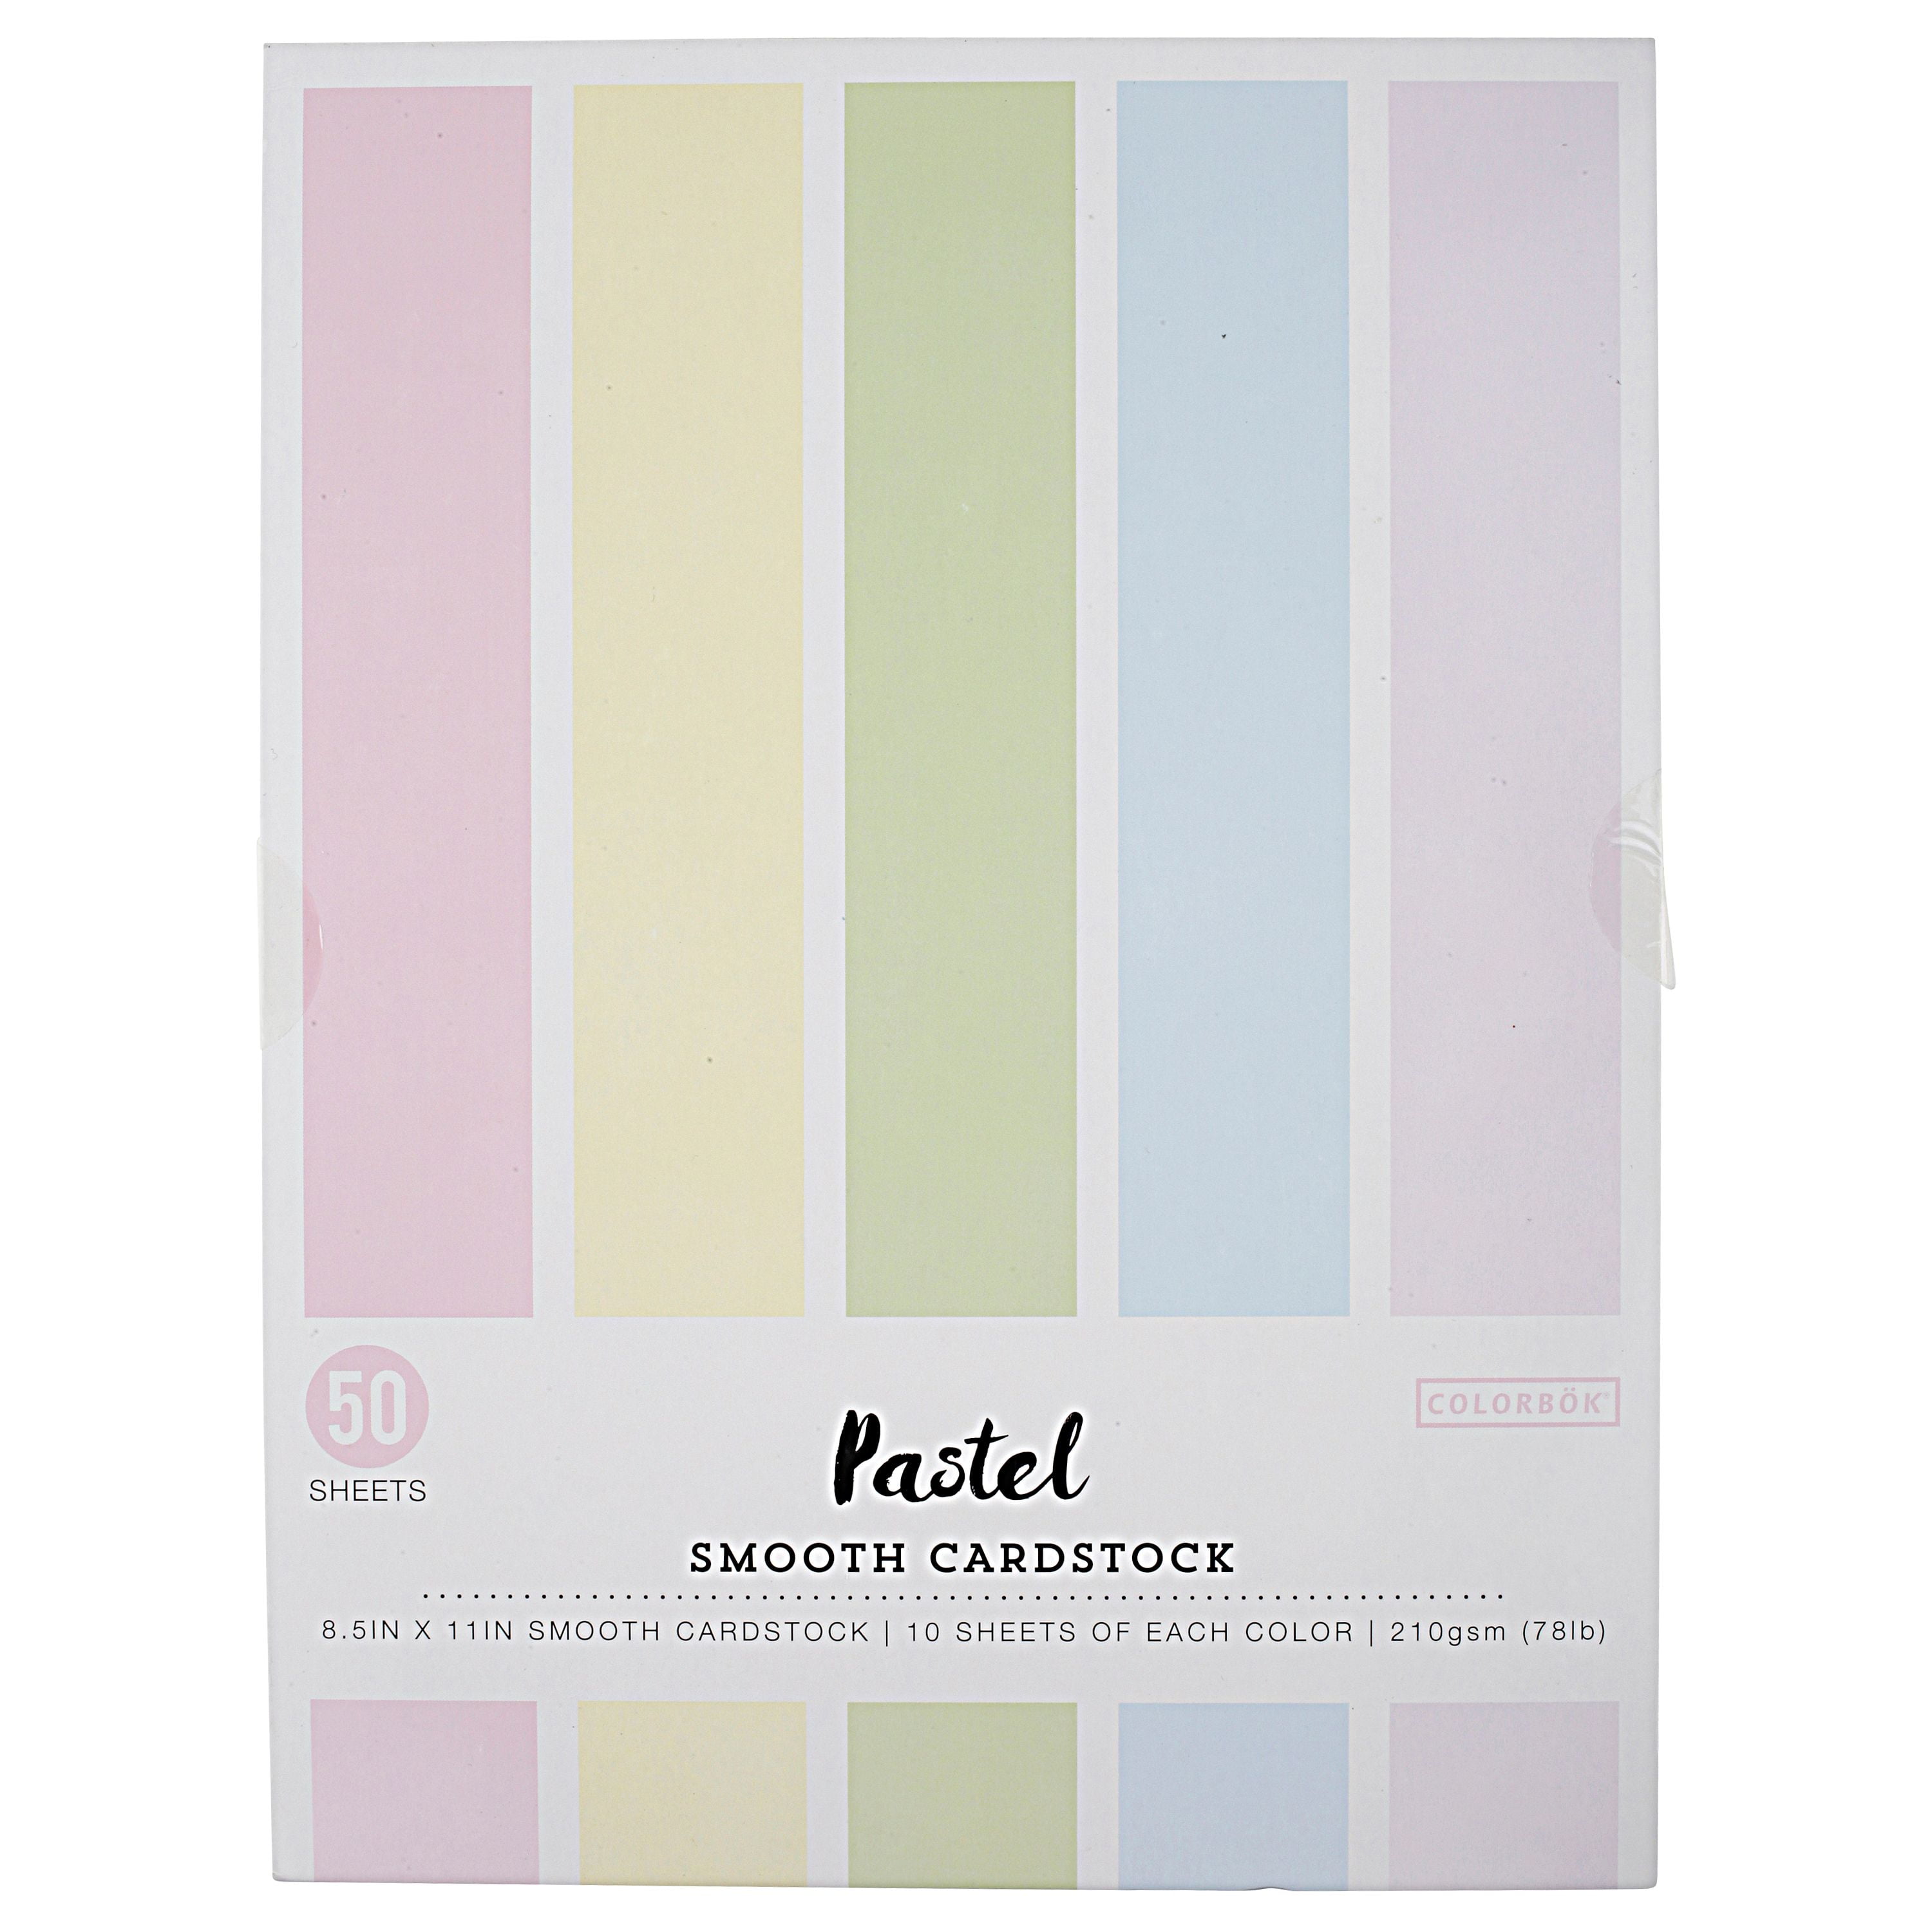 Pastel Papers pastel CARDSTOCK Paper Pastel Colored Paper With Cardstock  Texture Great for Backgrounds, Scrapbooking, Blogs and More (Instant  Download) 